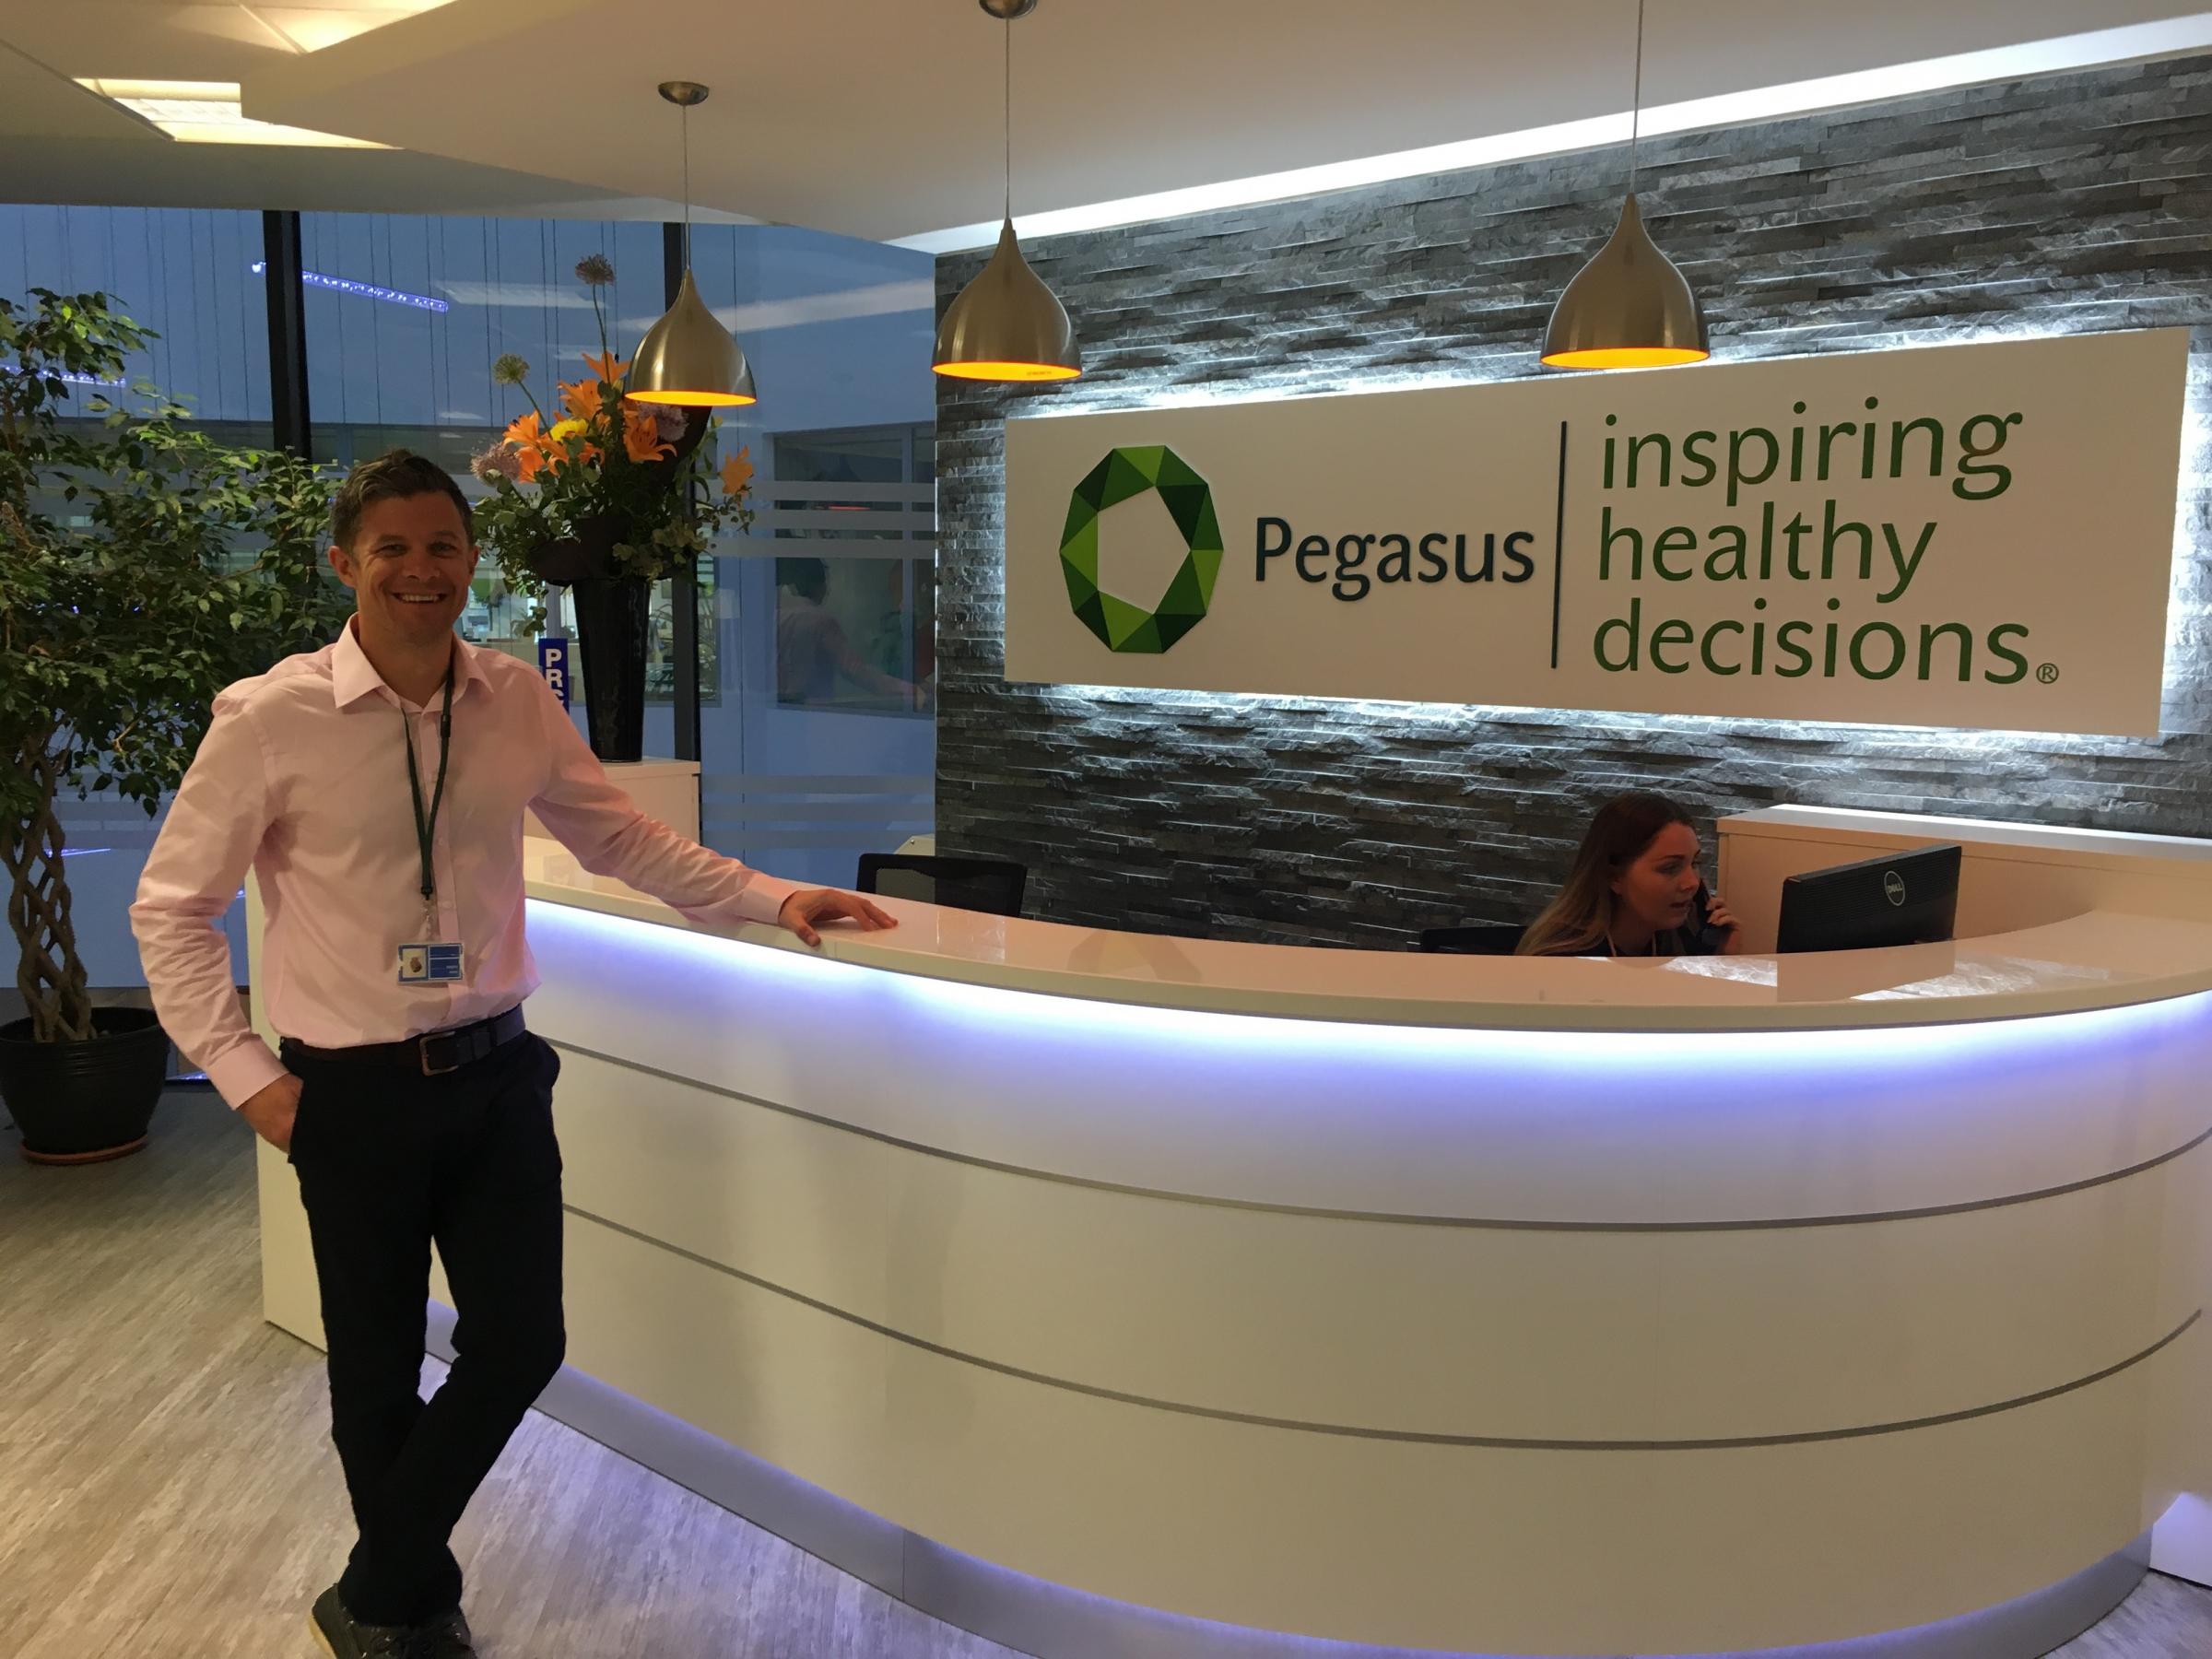 Health business gets a new look